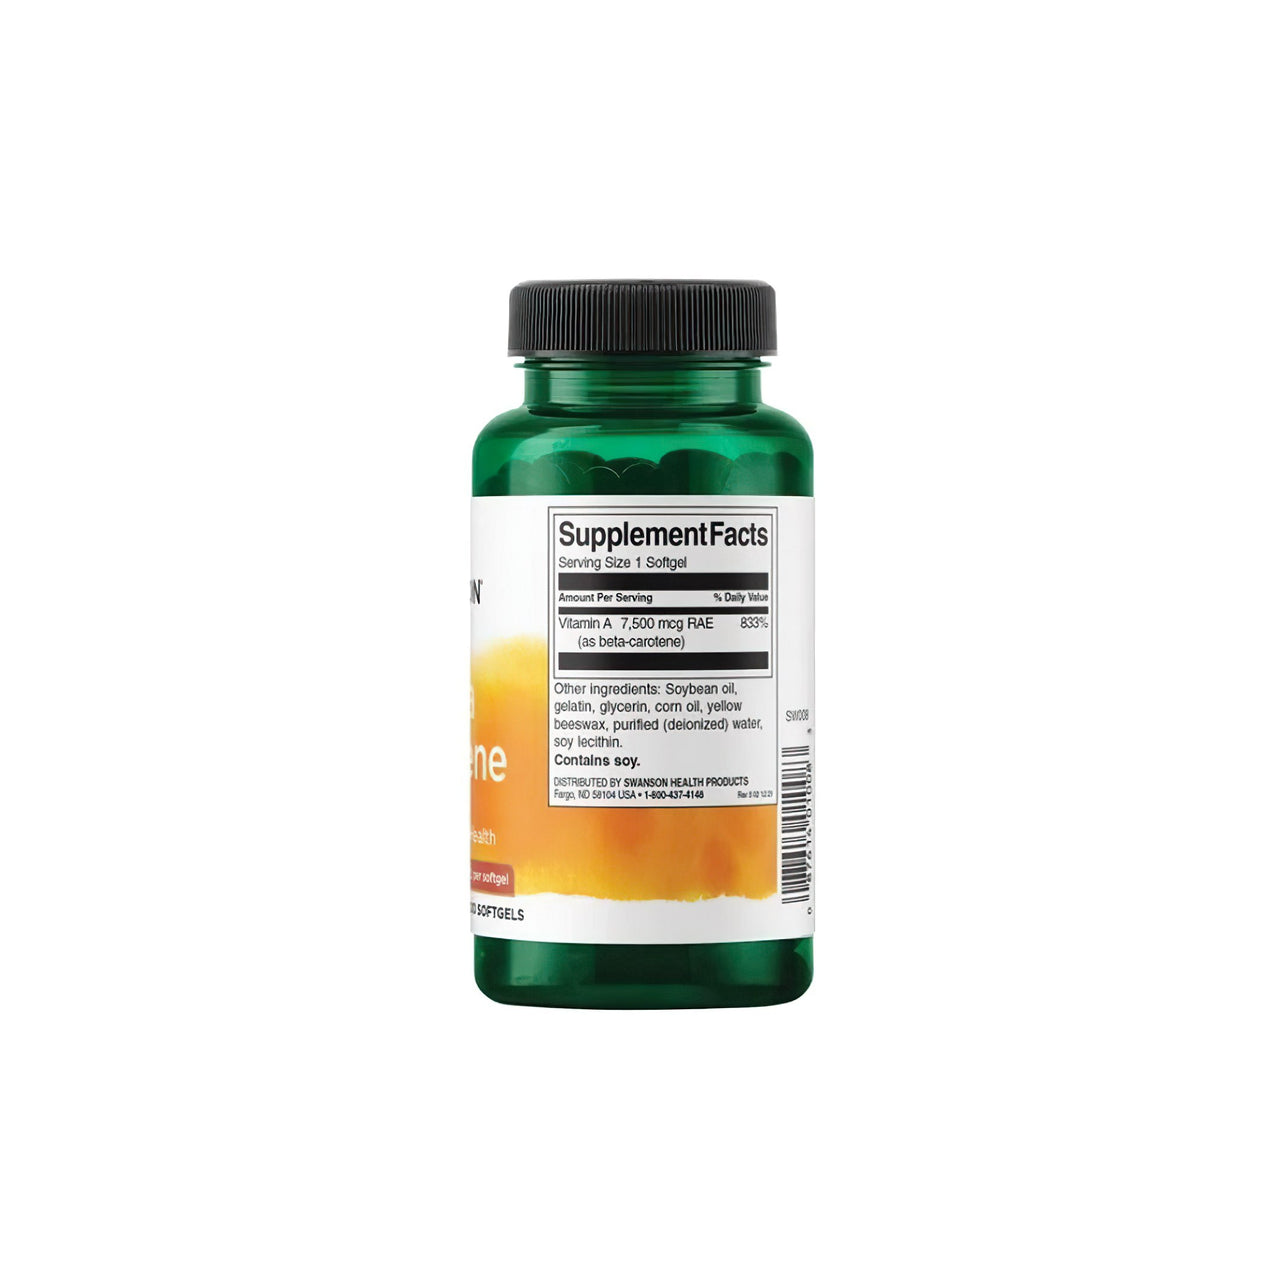 A dietary supplement bottle of Swanson Beta-Carotene - 25000 IU 300 softgels Vitamin A on a white background.